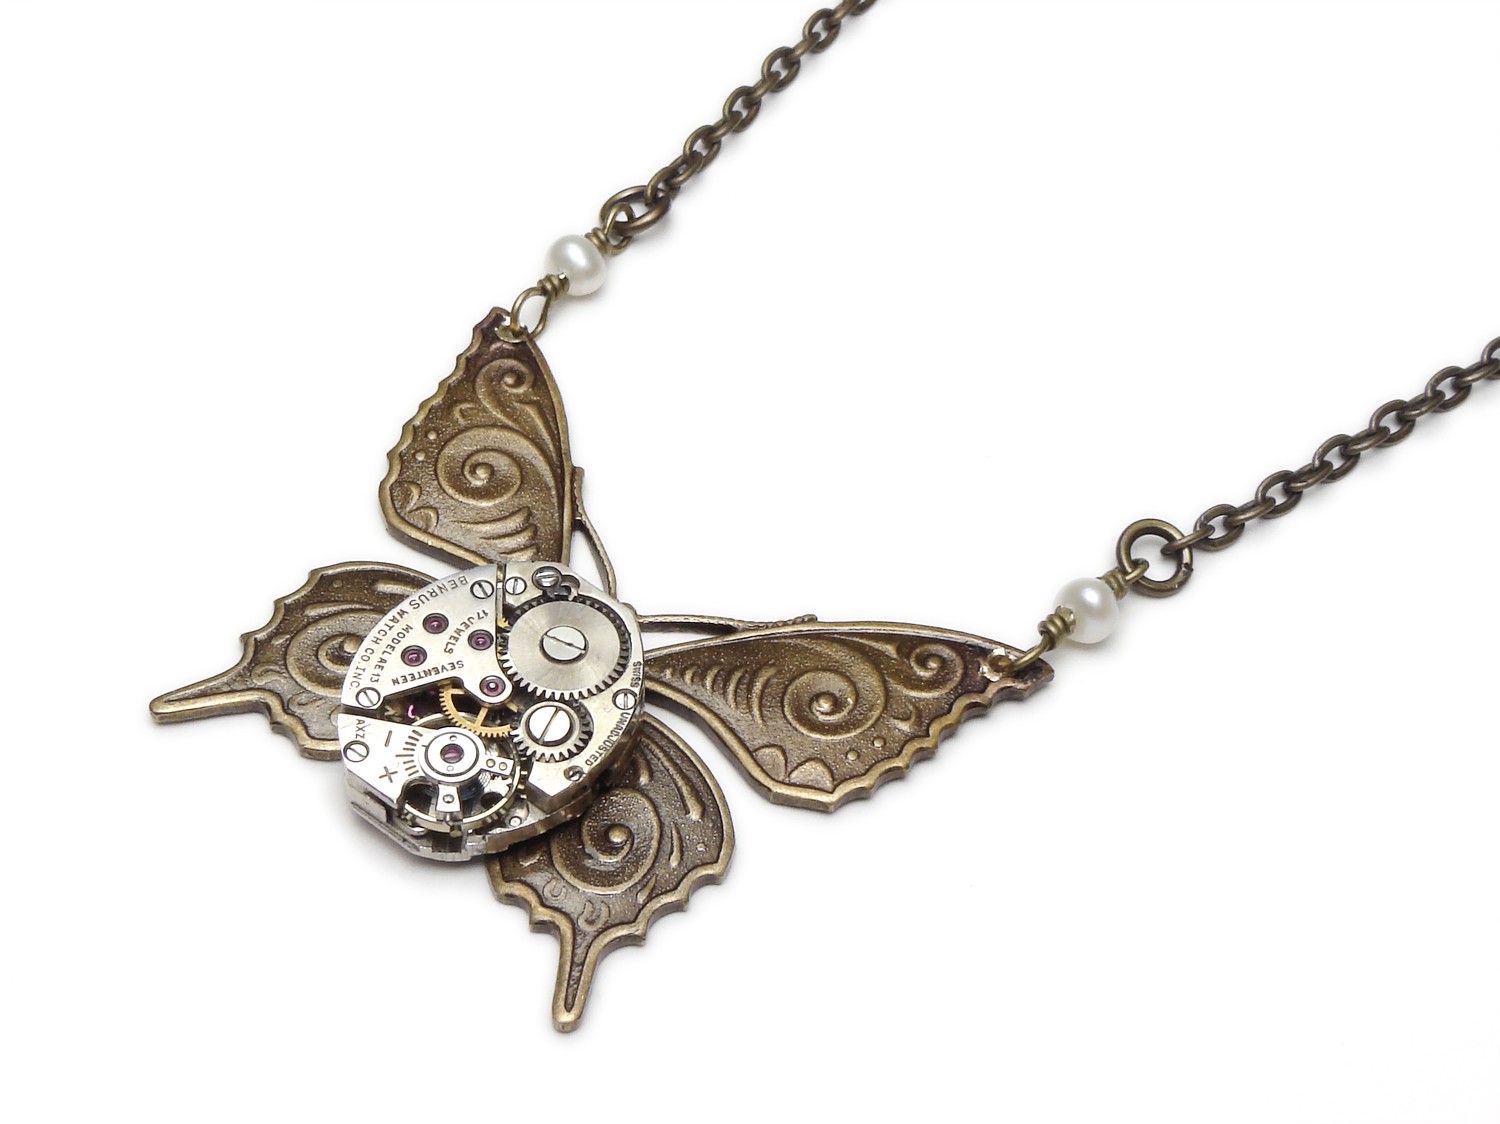 Steampunk Necklace antique 17 ruby jewel wristwatch movement circa 1940 silver gold brass butterfly with genuine pearls vintage pendant